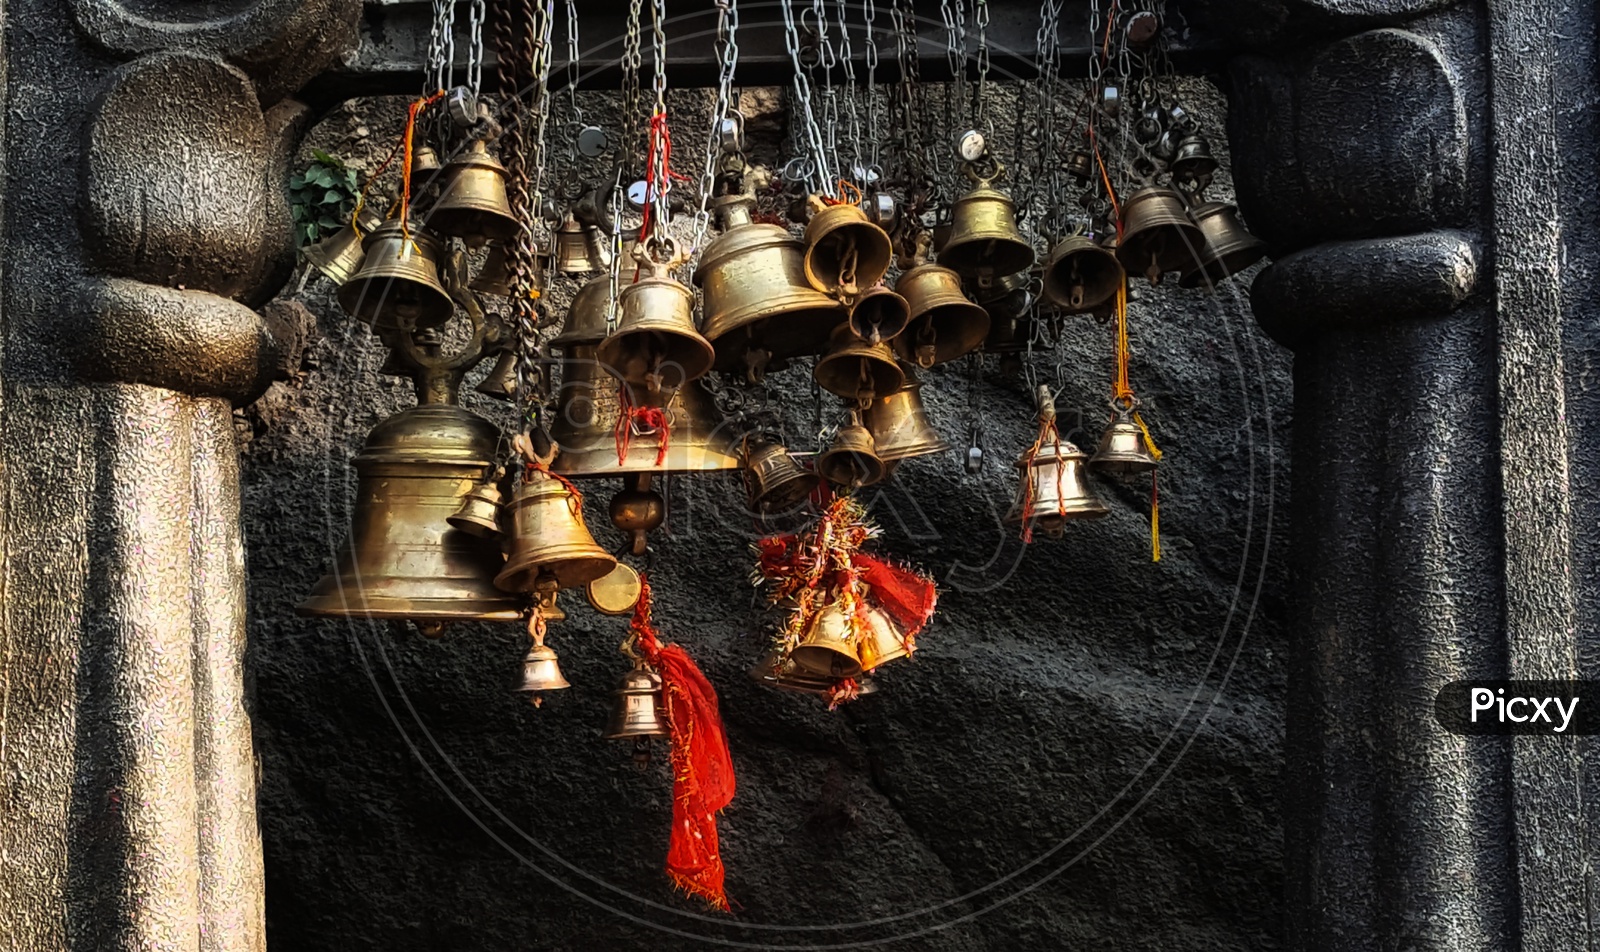 The peace bells